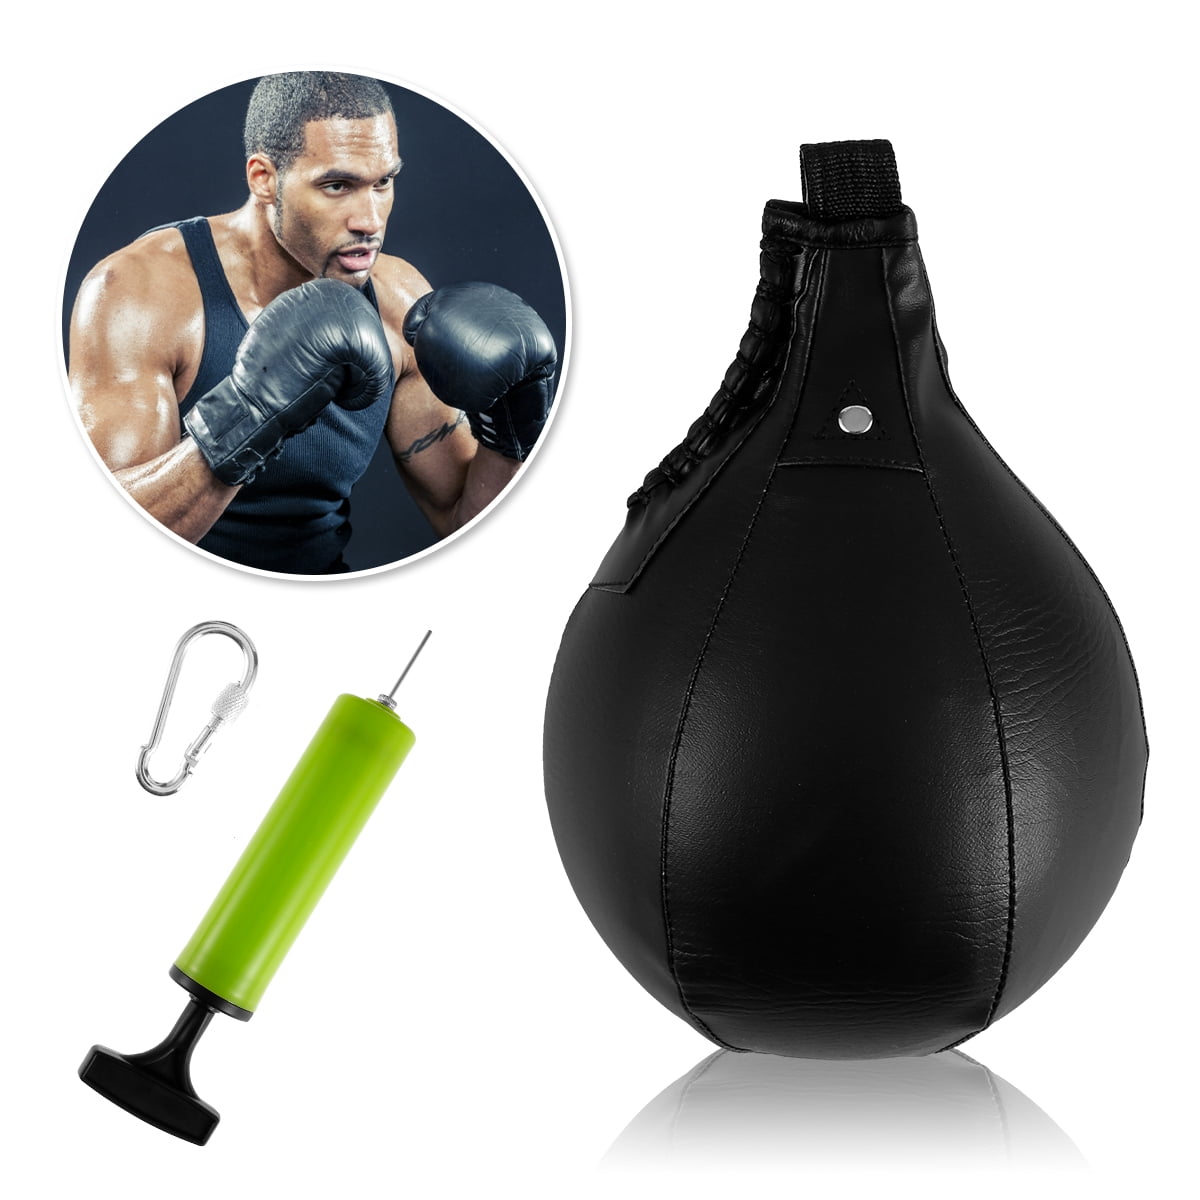 Double End Inflatable Hanging Boxing Speed Rebound Ball Punching Training Equip 